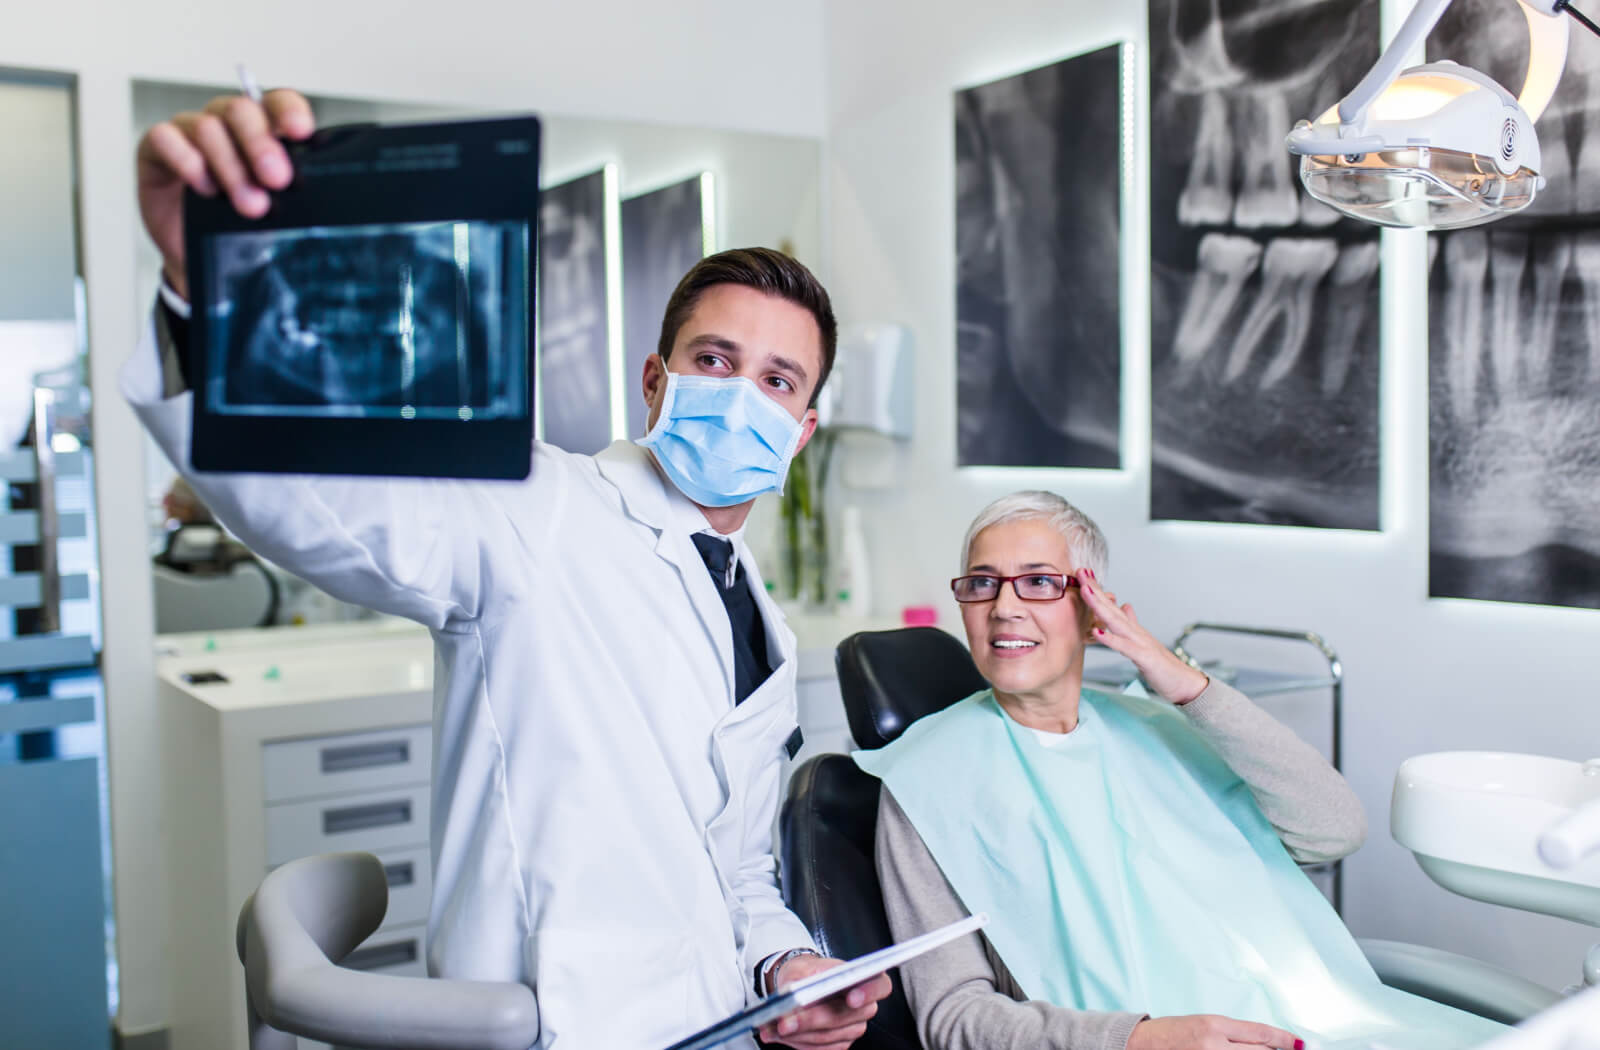 A male dentist with a mask explaining a dental procedure to a senior woman while holding a dental X-ray image